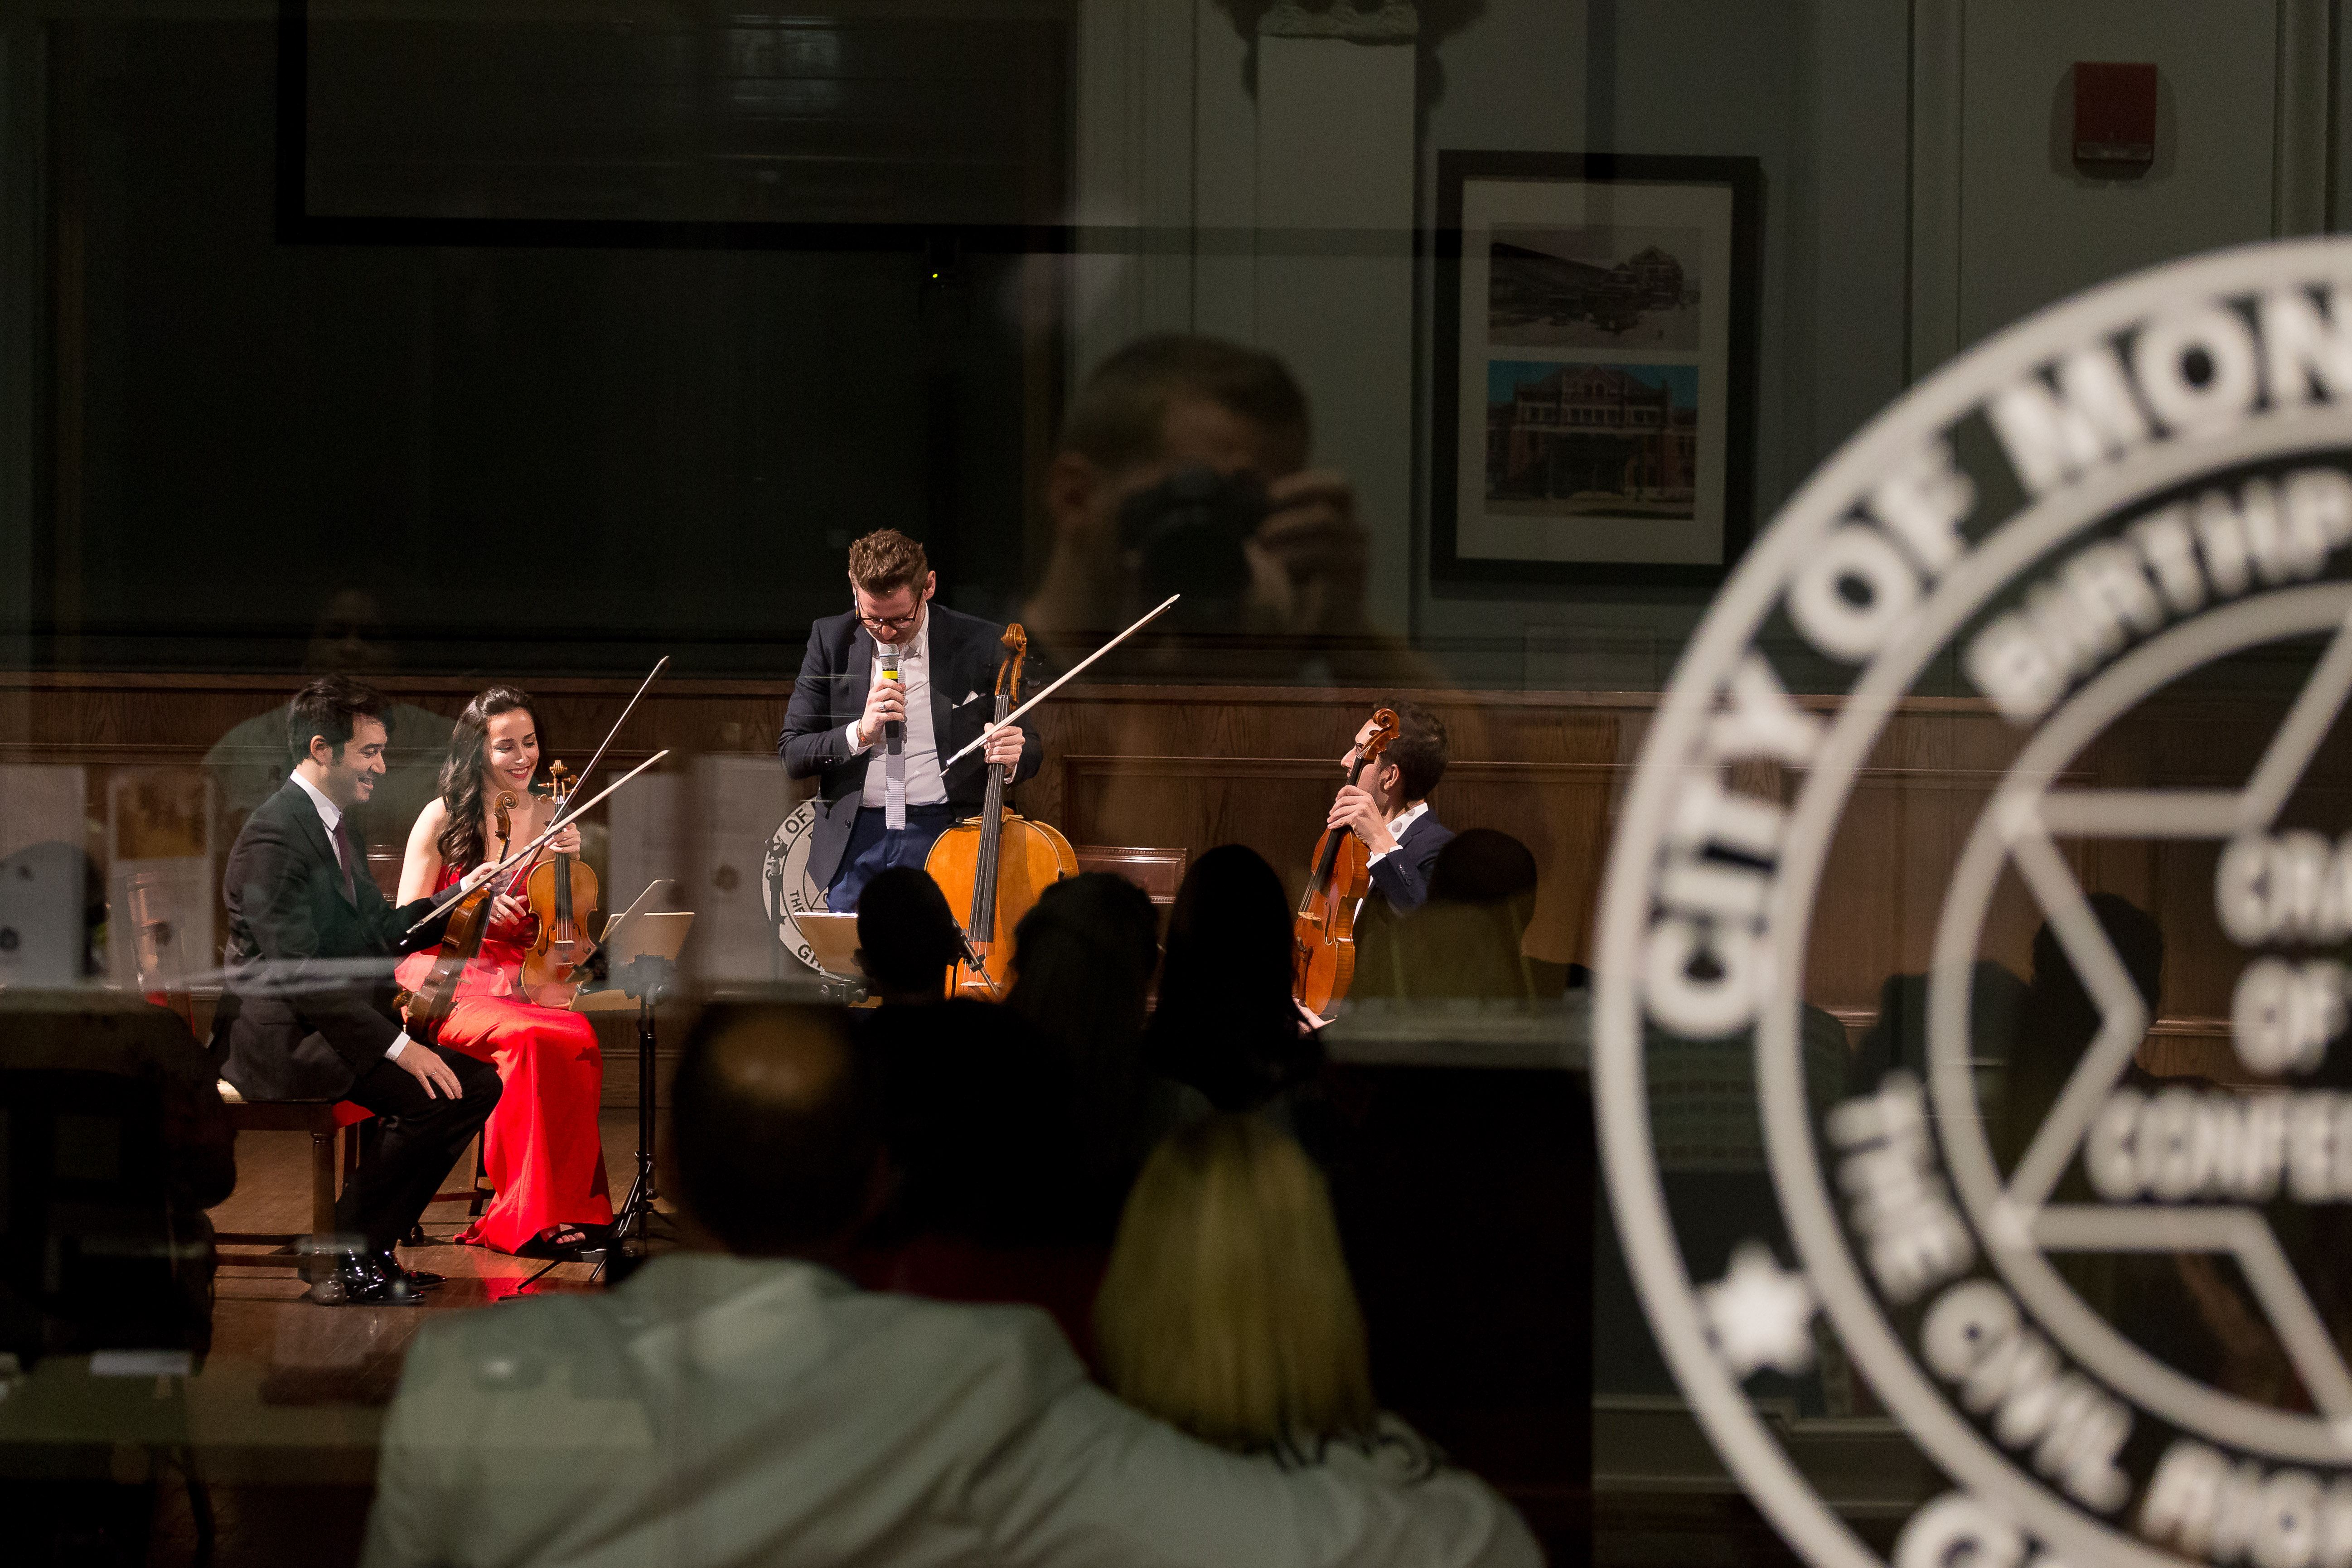 Musicians playing stringed instruments with a seal of the City of Montgomery in the foreground